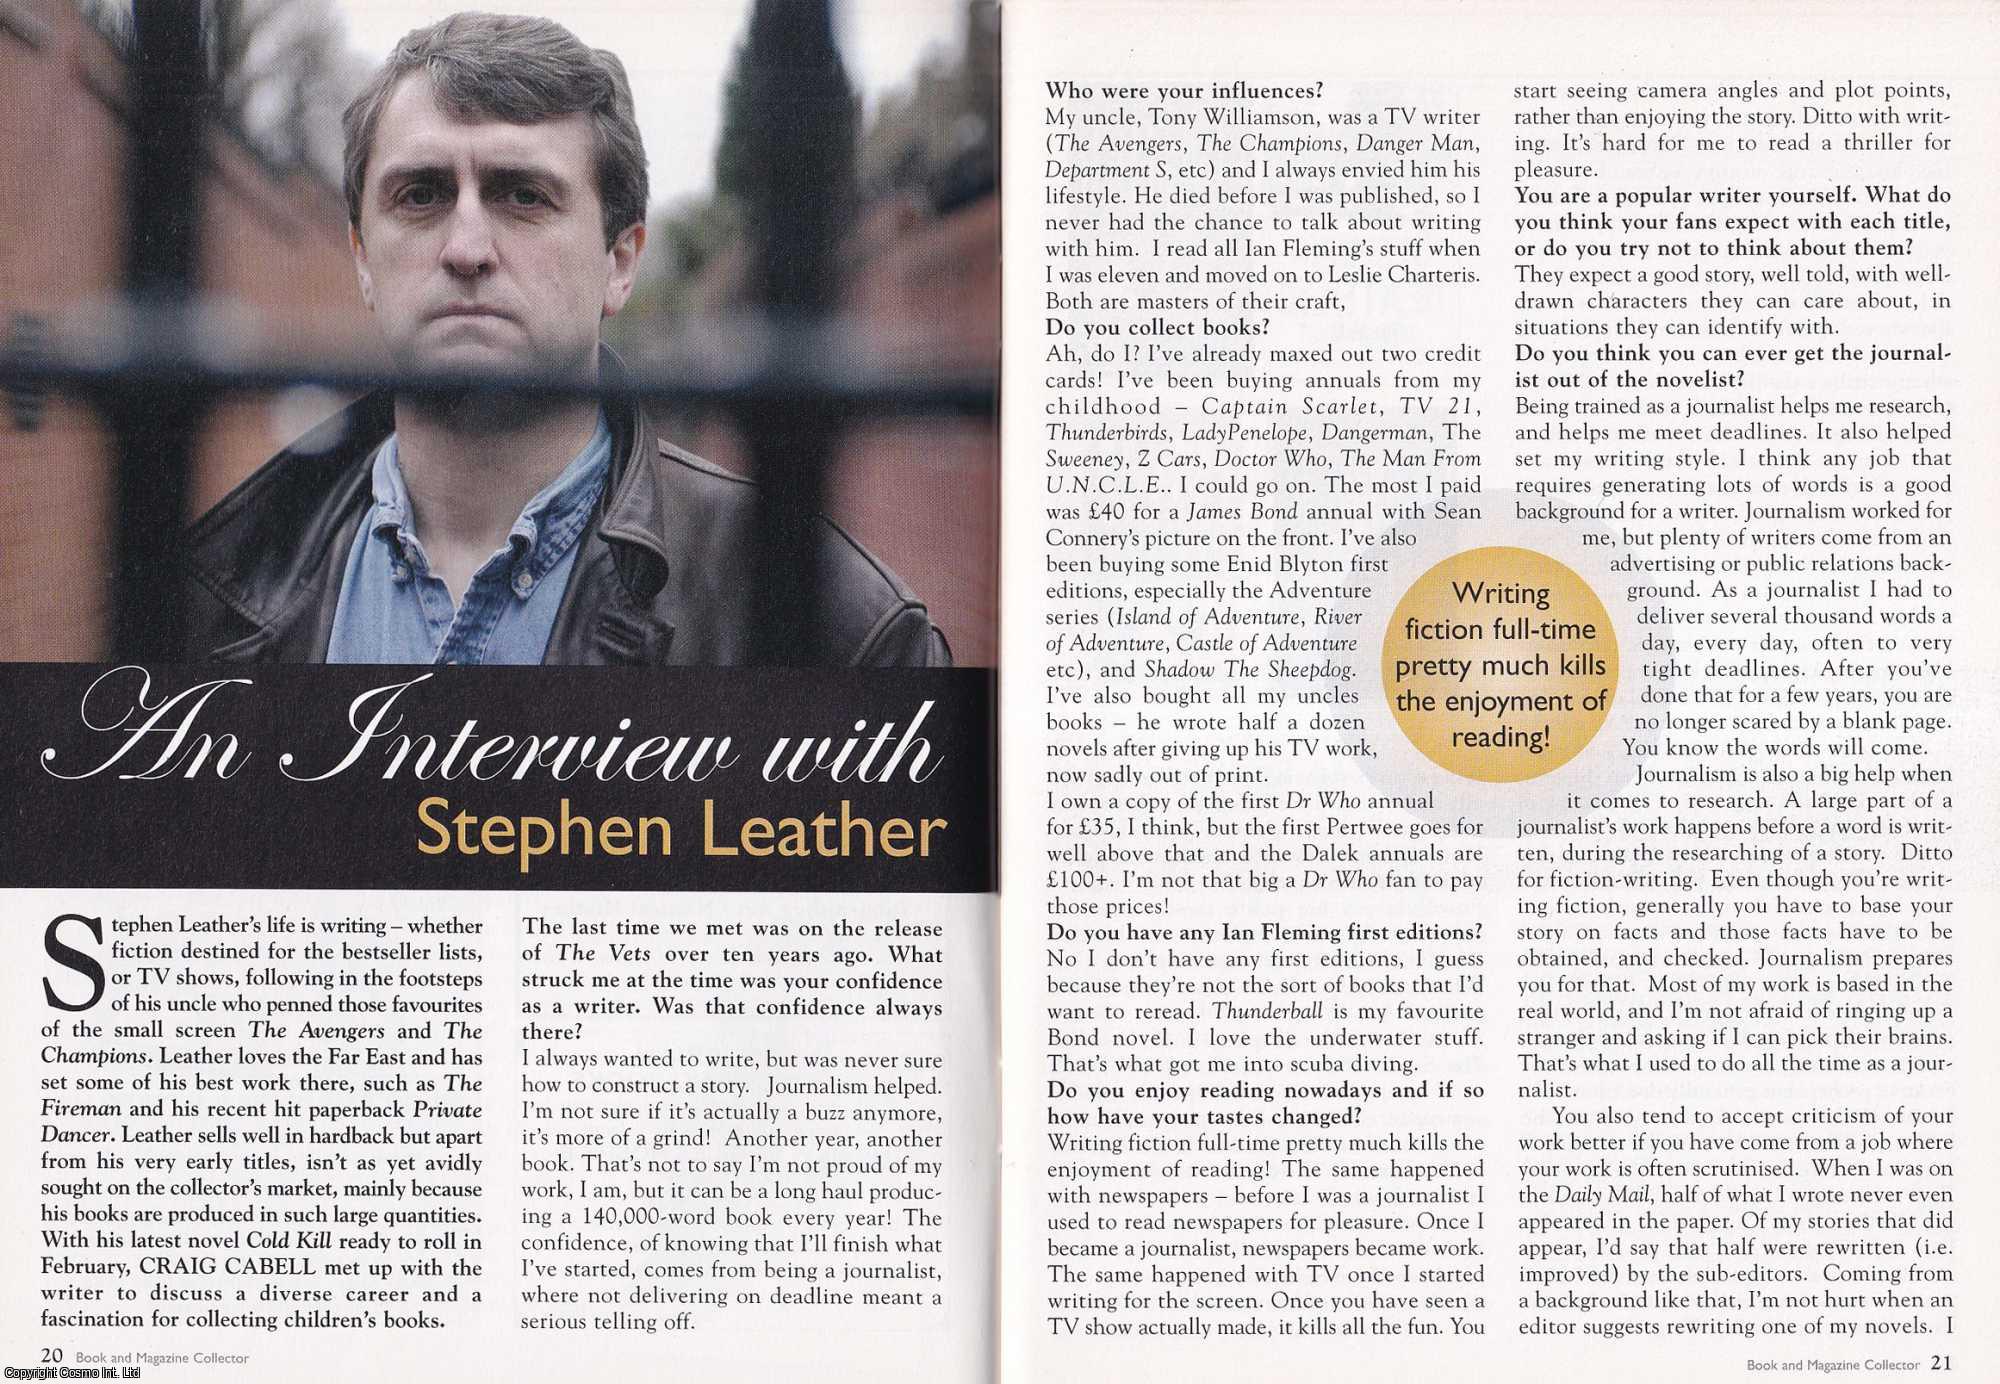 Unstated - An Interview with Stephen Leather (British author). This is an original article separated from an issue of The Book & Magazine Collector publication.